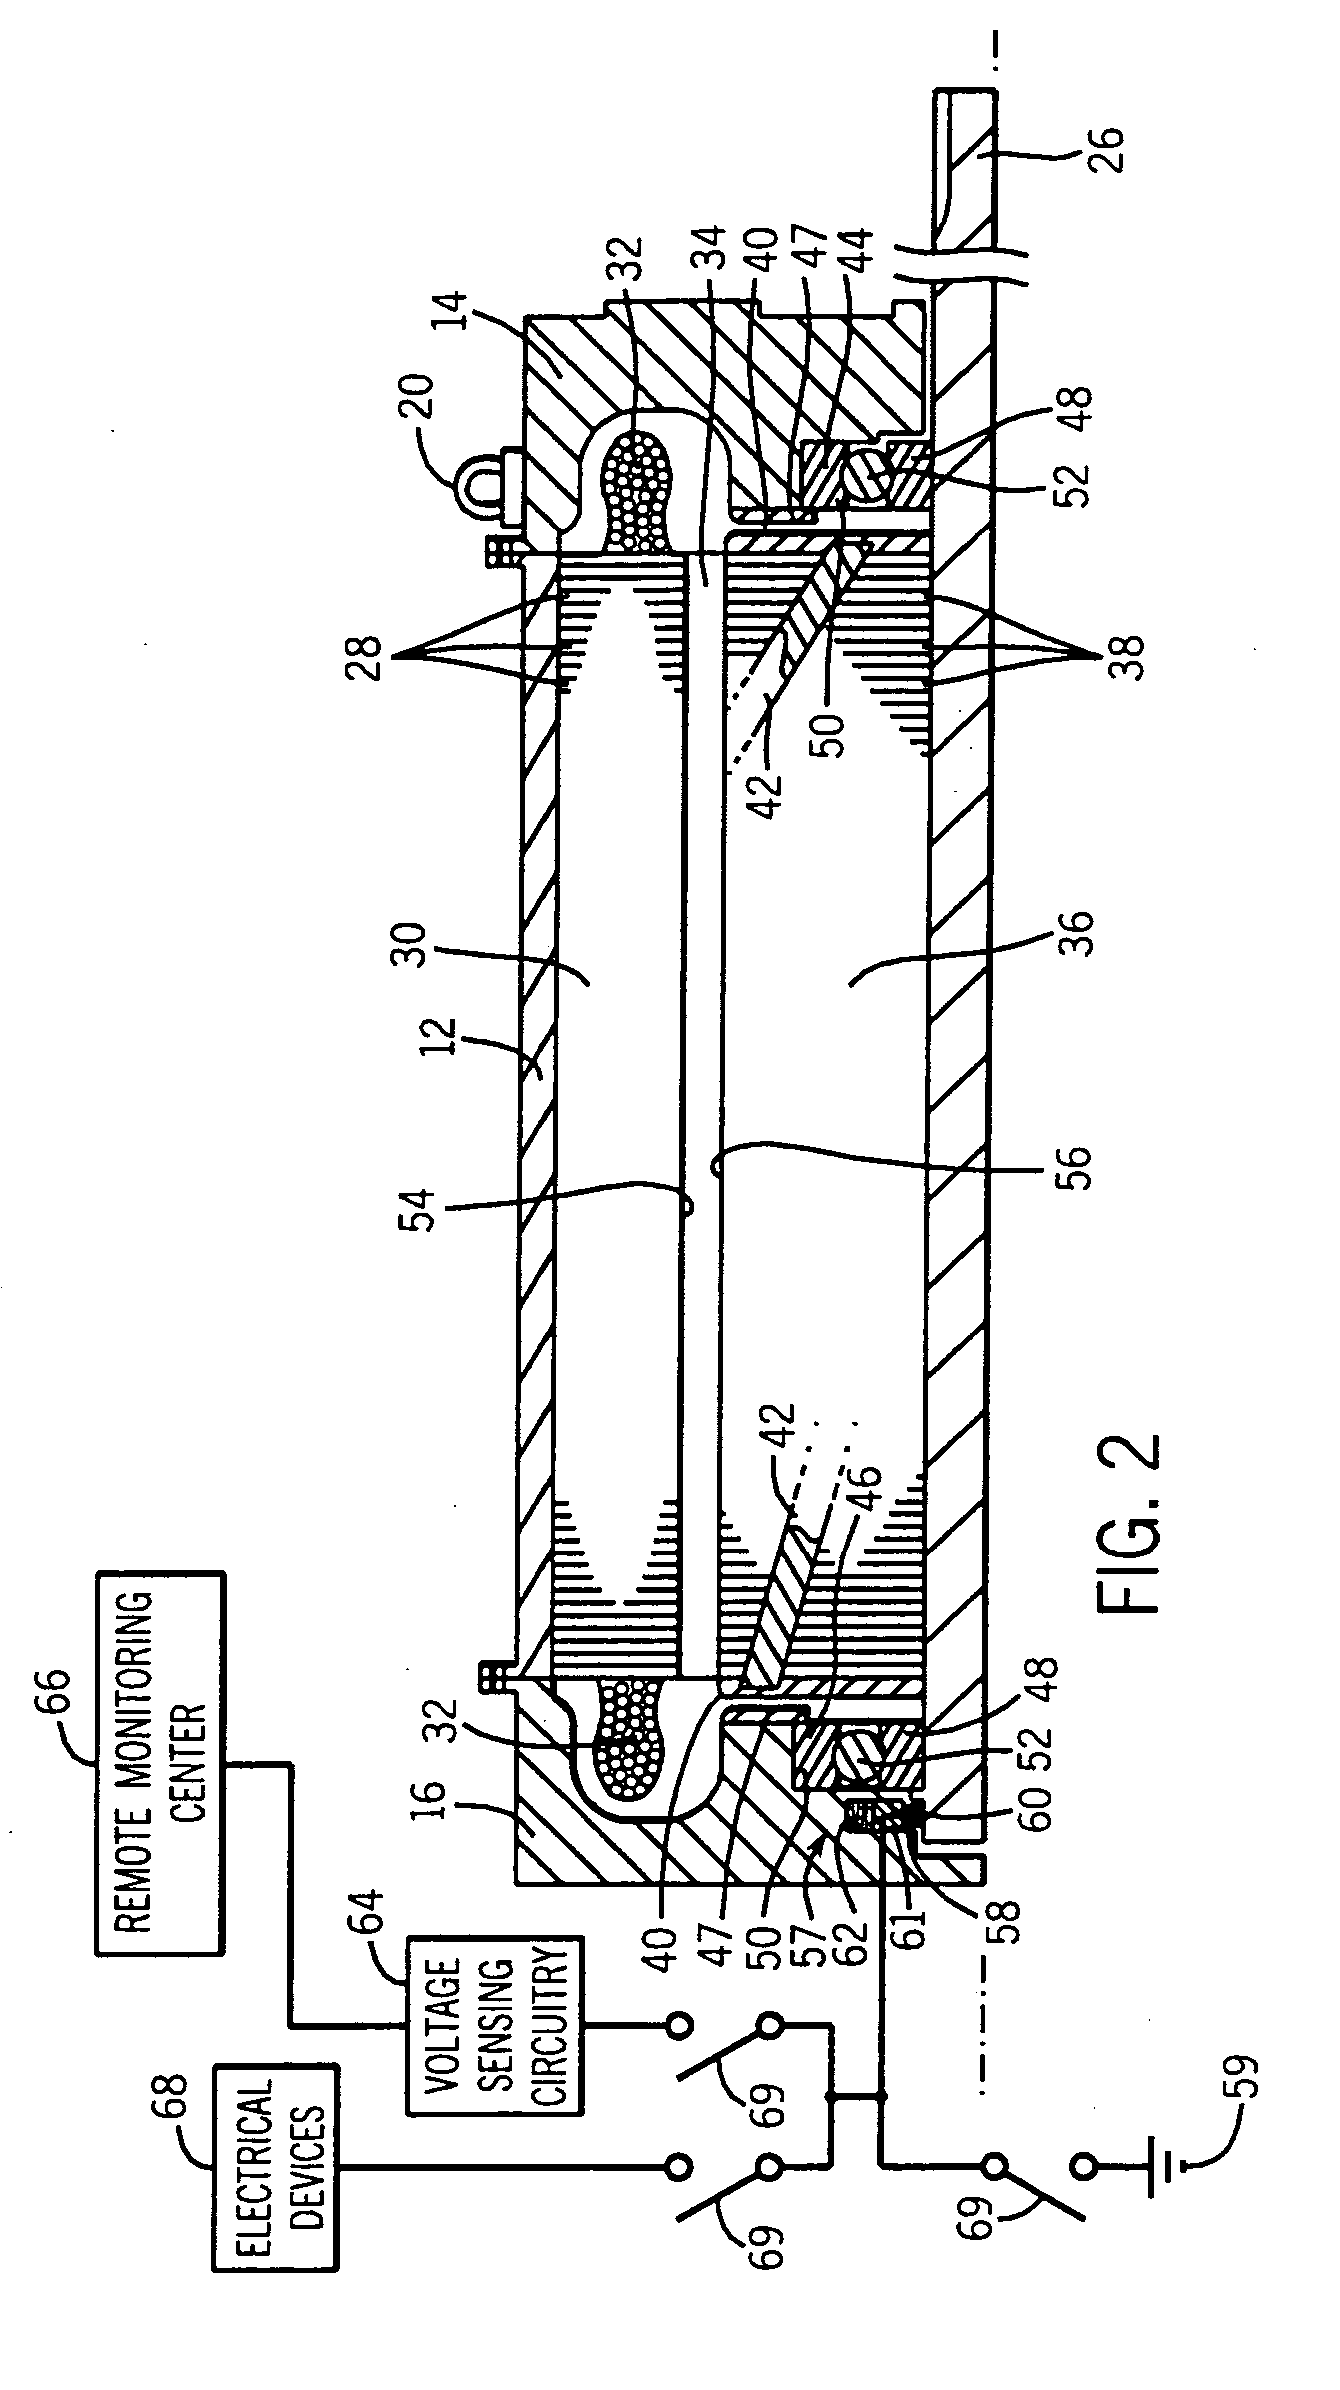 Method and apparatus for dissipating shaft charge